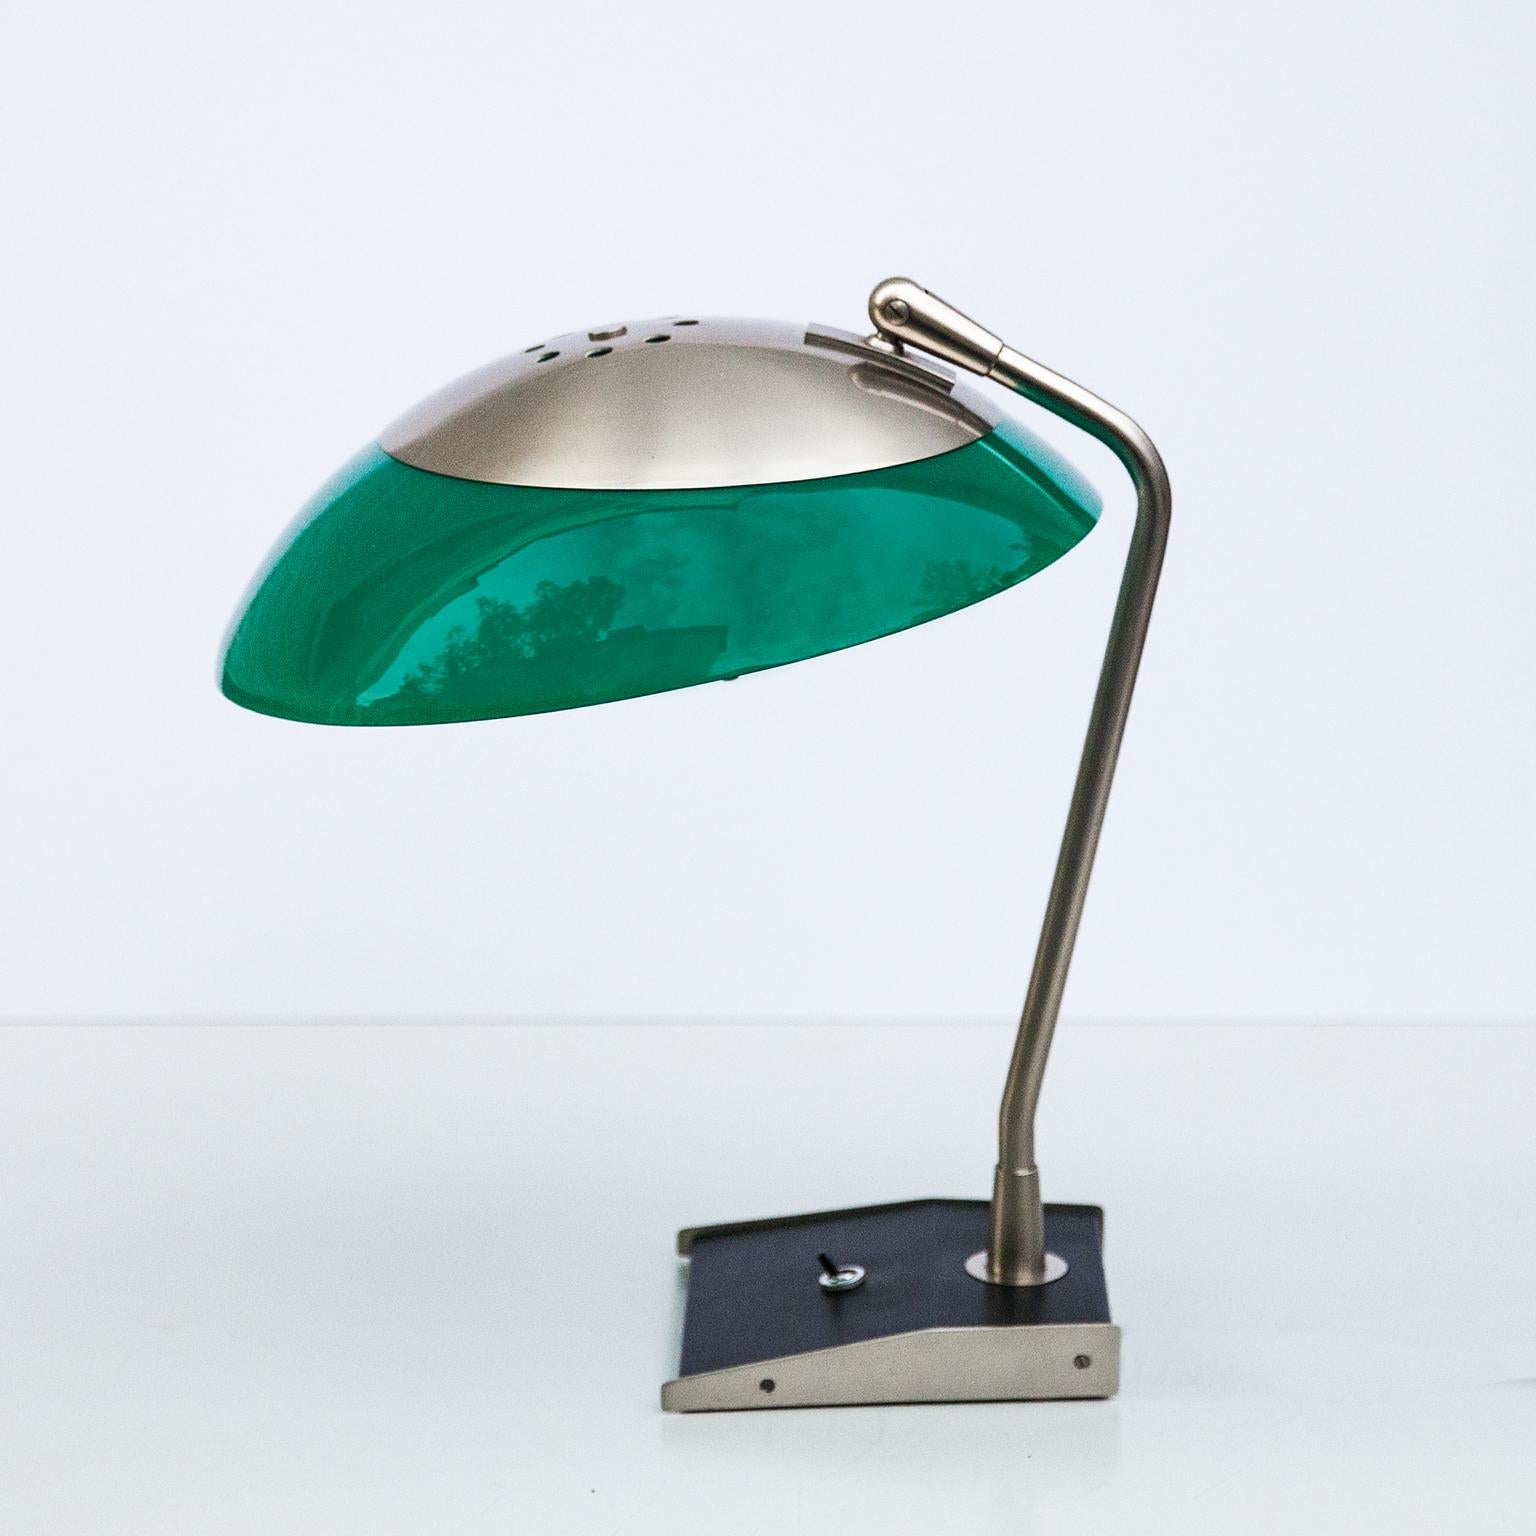 Stilnovo table or desk lamp with a black painted base and a white and green adjustable perspex shade. New wiring and plug, but the marked Stilnovo old plug is included.